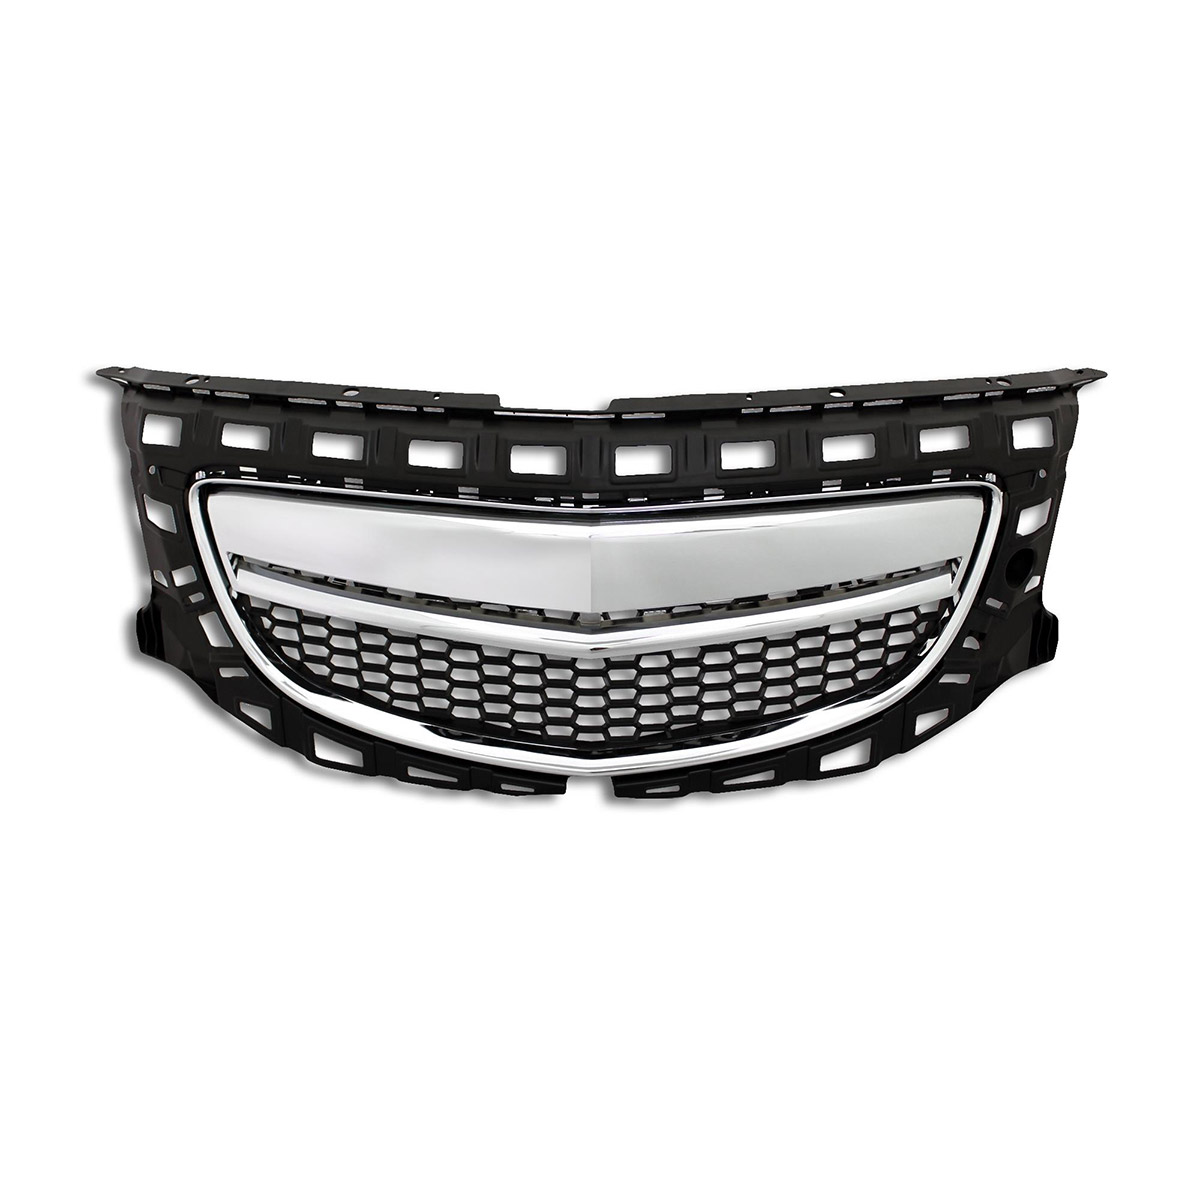 For Prefacelift Insignia DEBADGED OPC BADGELESS GRILLE Hood Grill GTC no emblem 